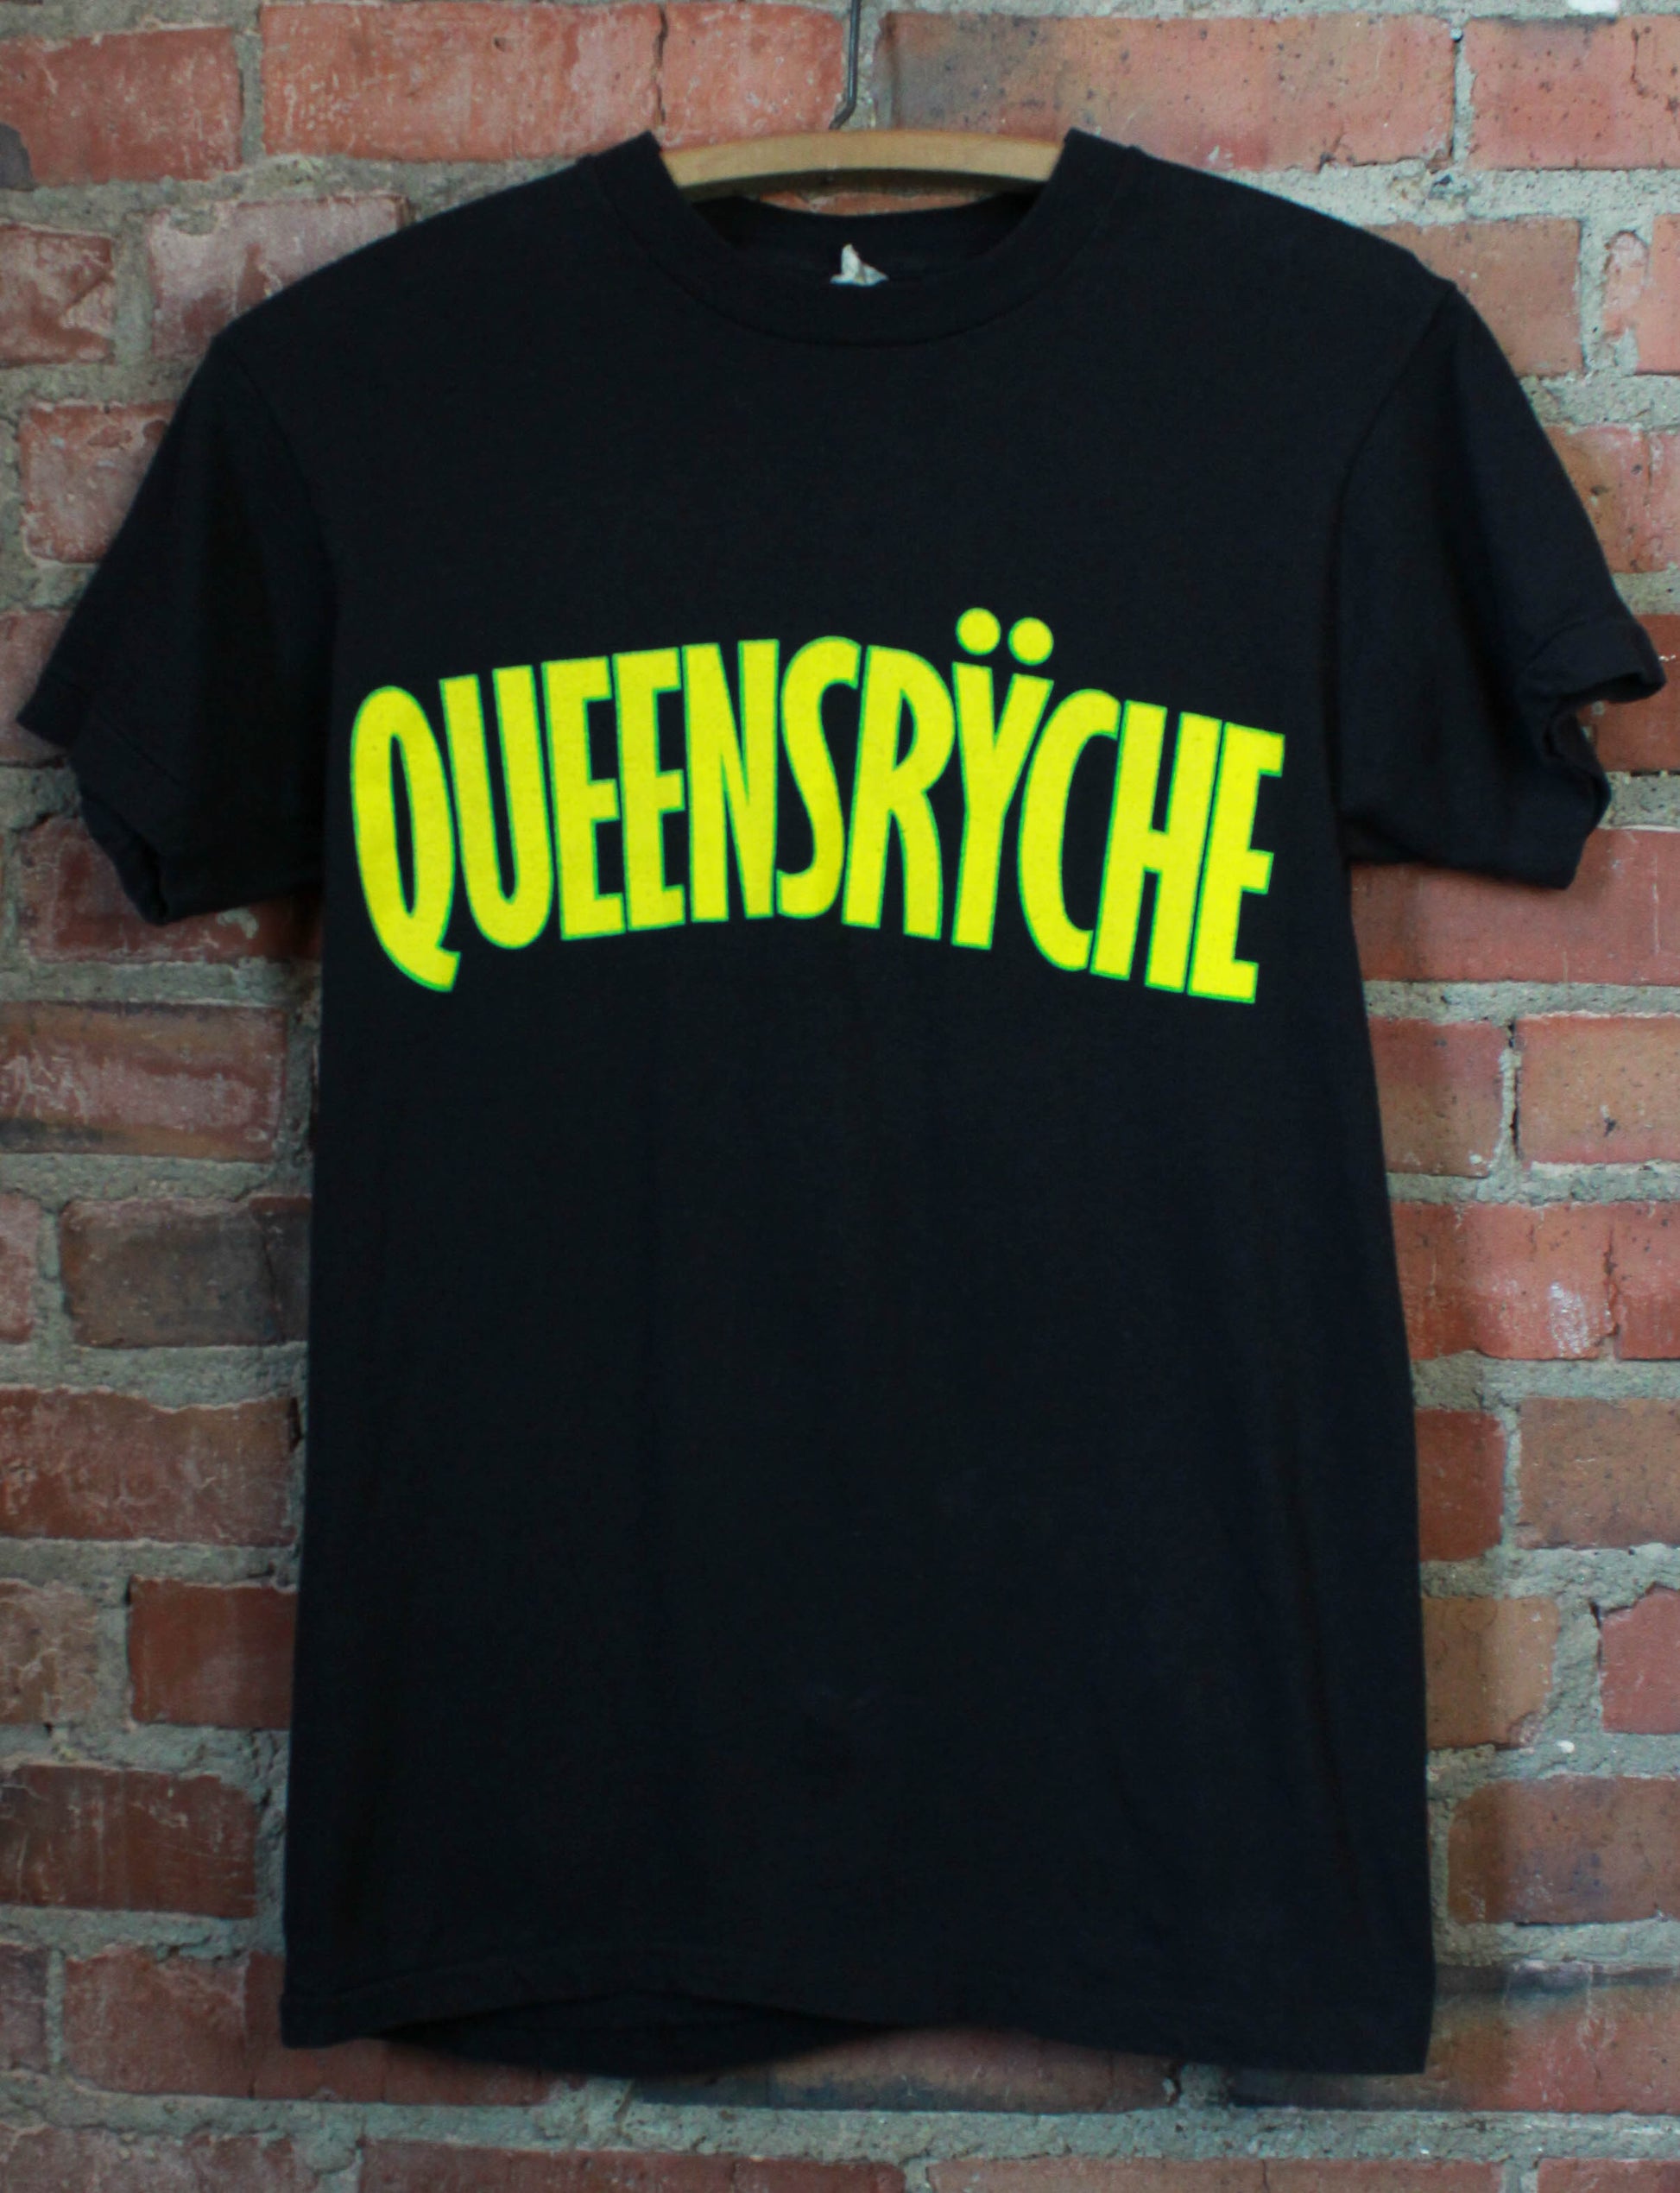 Vintage 1985 Queensryche Concert T Shirt The Warning Tour Black Unisex Small/XS